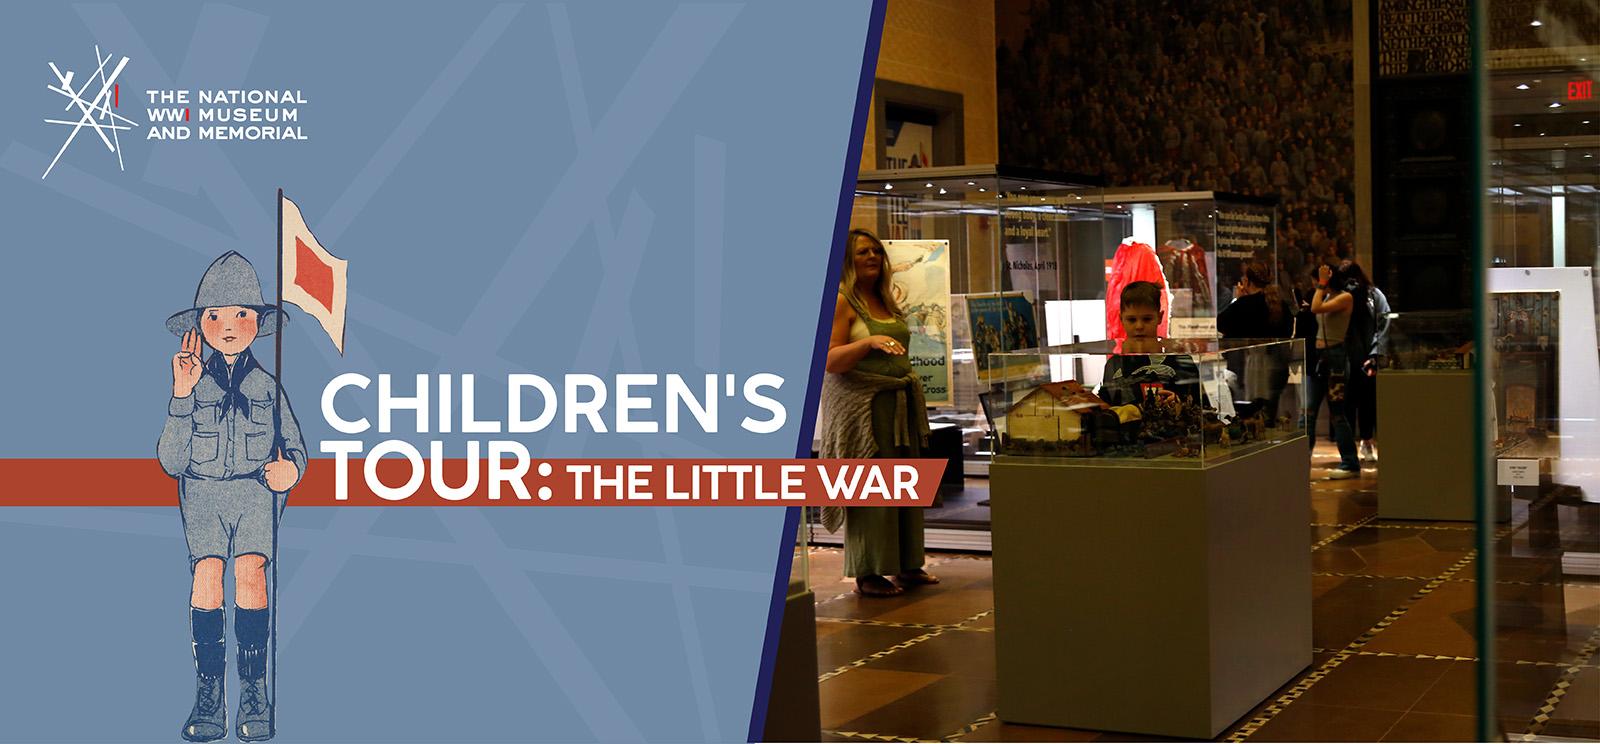 Image: Modern photograph of a museum exhibition with a white male child and a white adult woman perusing the glass exhibit cases. Logo: a cartoon illustration of a white child wearing a light blue scouting uniform and brimmed hat or helmet, while waving a yellow flag with a red rectangle at the center. Text: 'Children's Tour: The Little War'